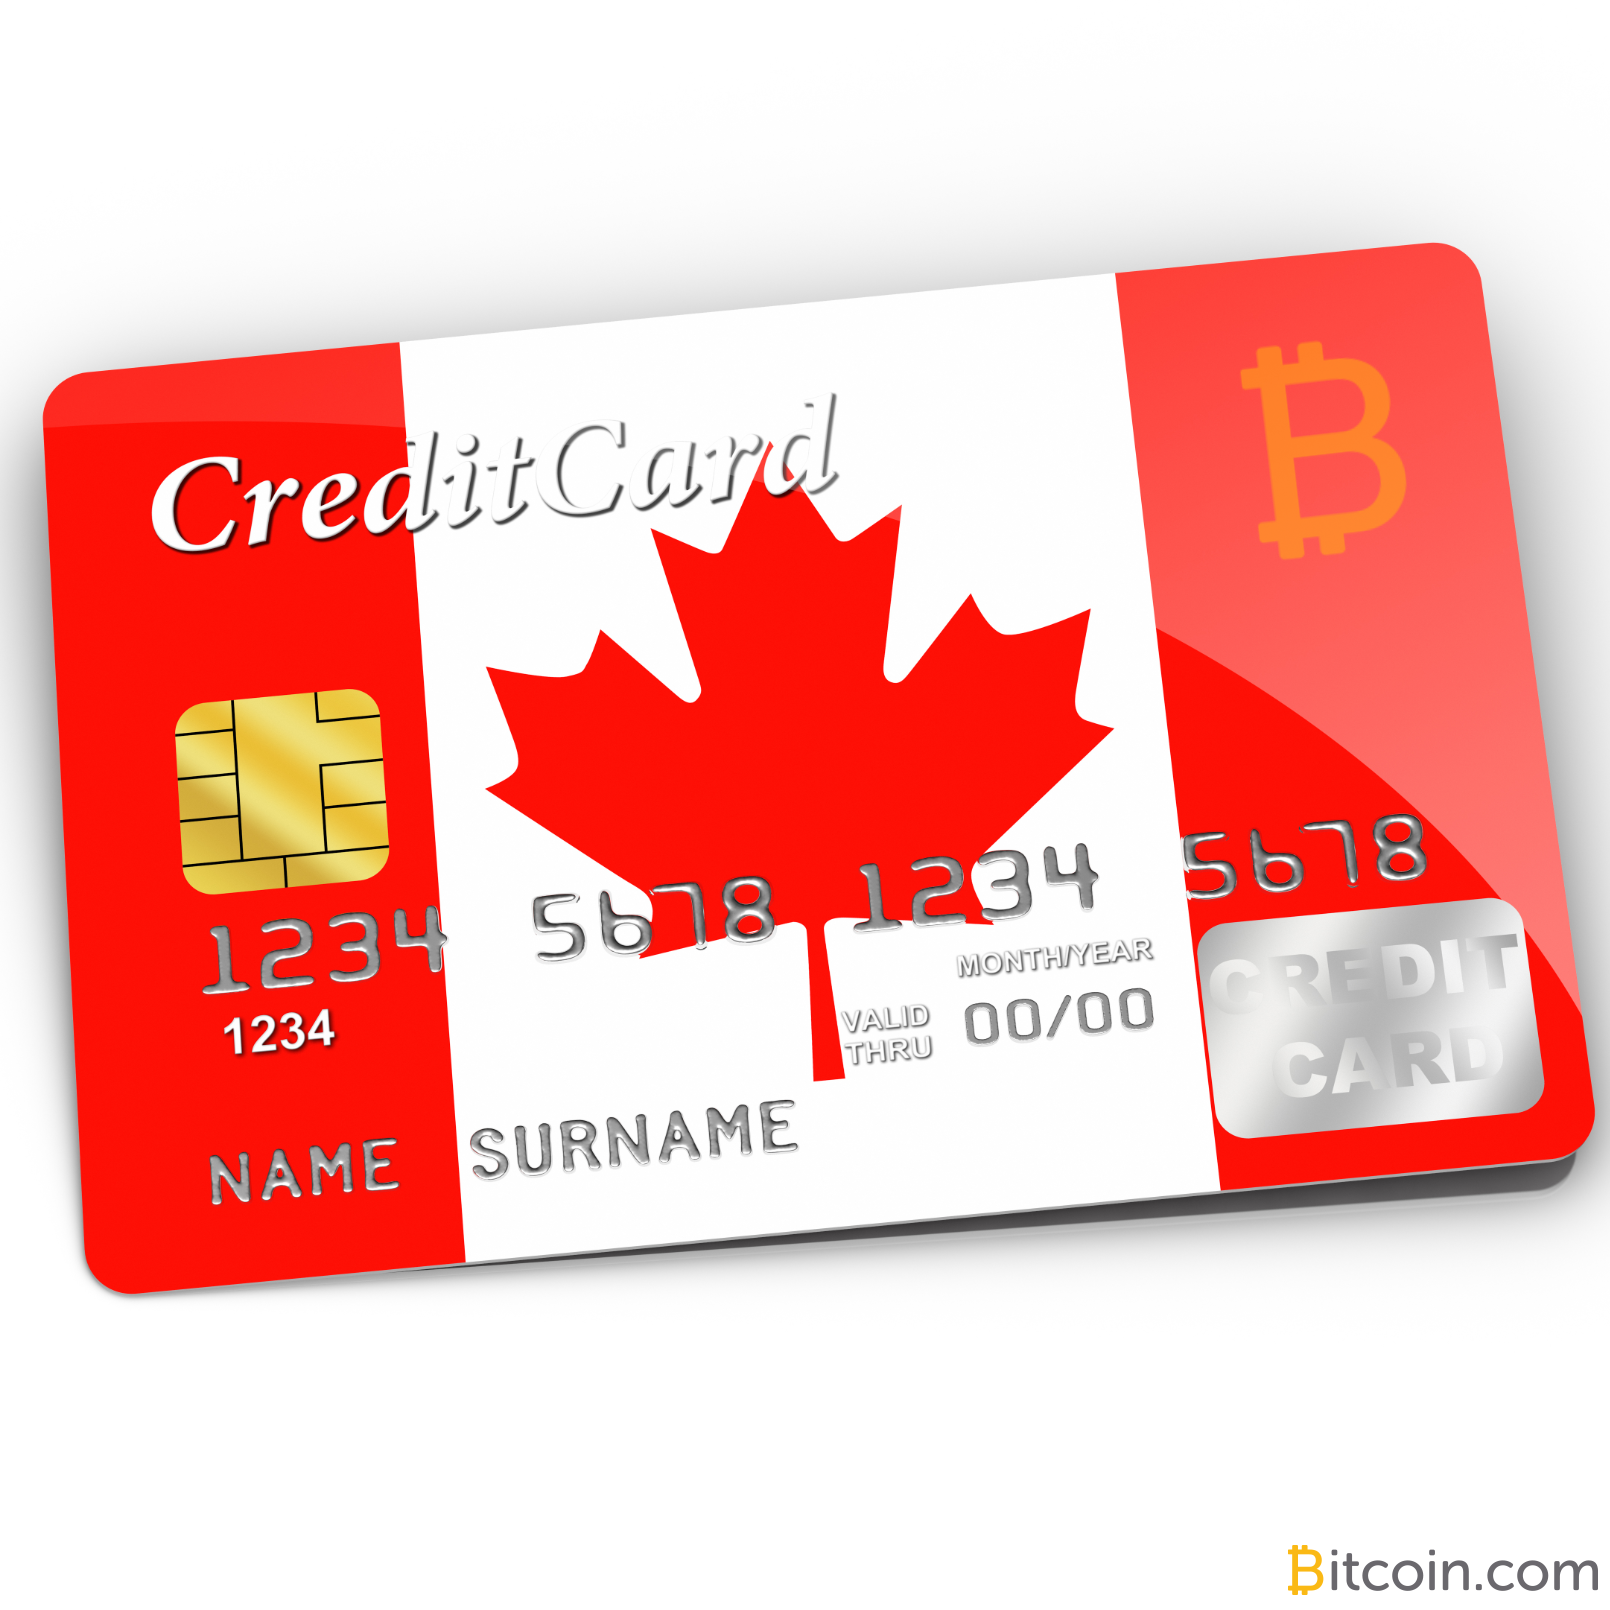 Some Major Canadian Banks Still Allow Cryptocurrency Credit Card Transactions